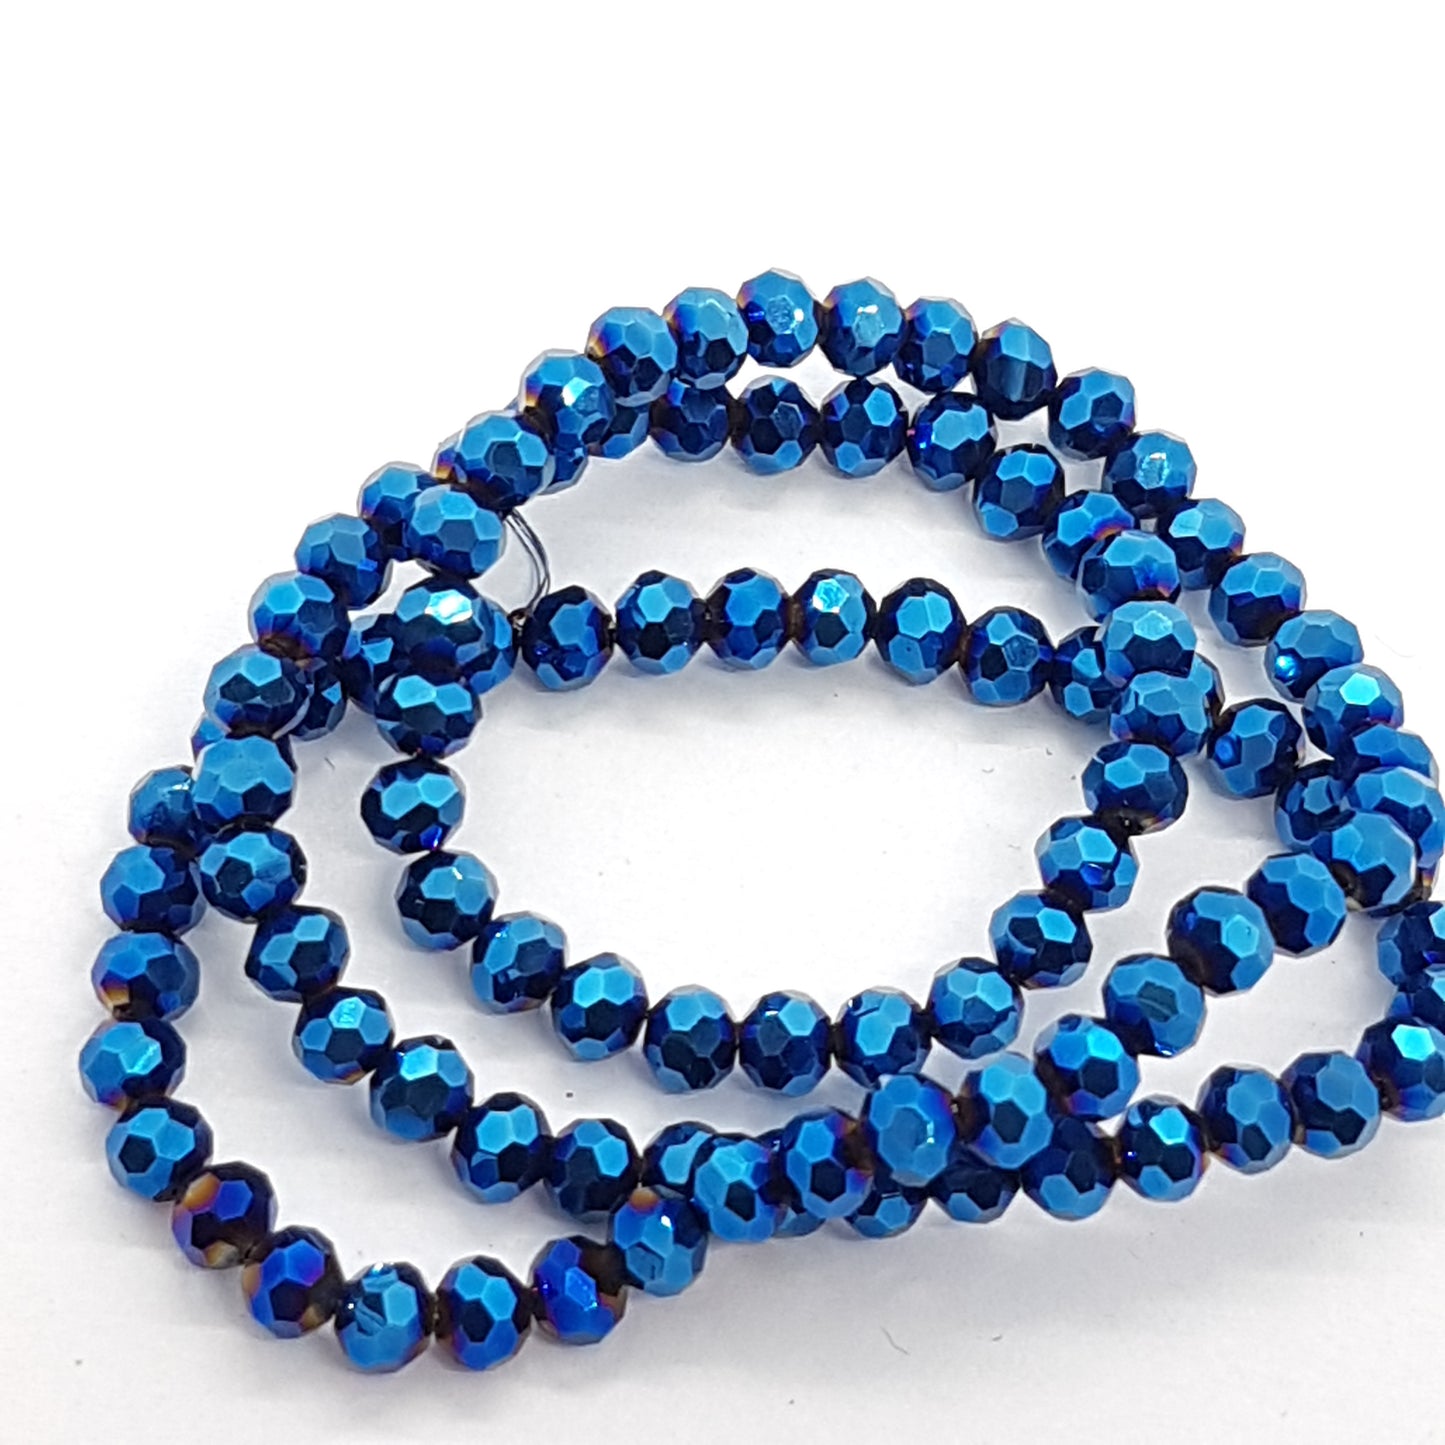 Metallic Blue Faceted Crystal Glass Beads